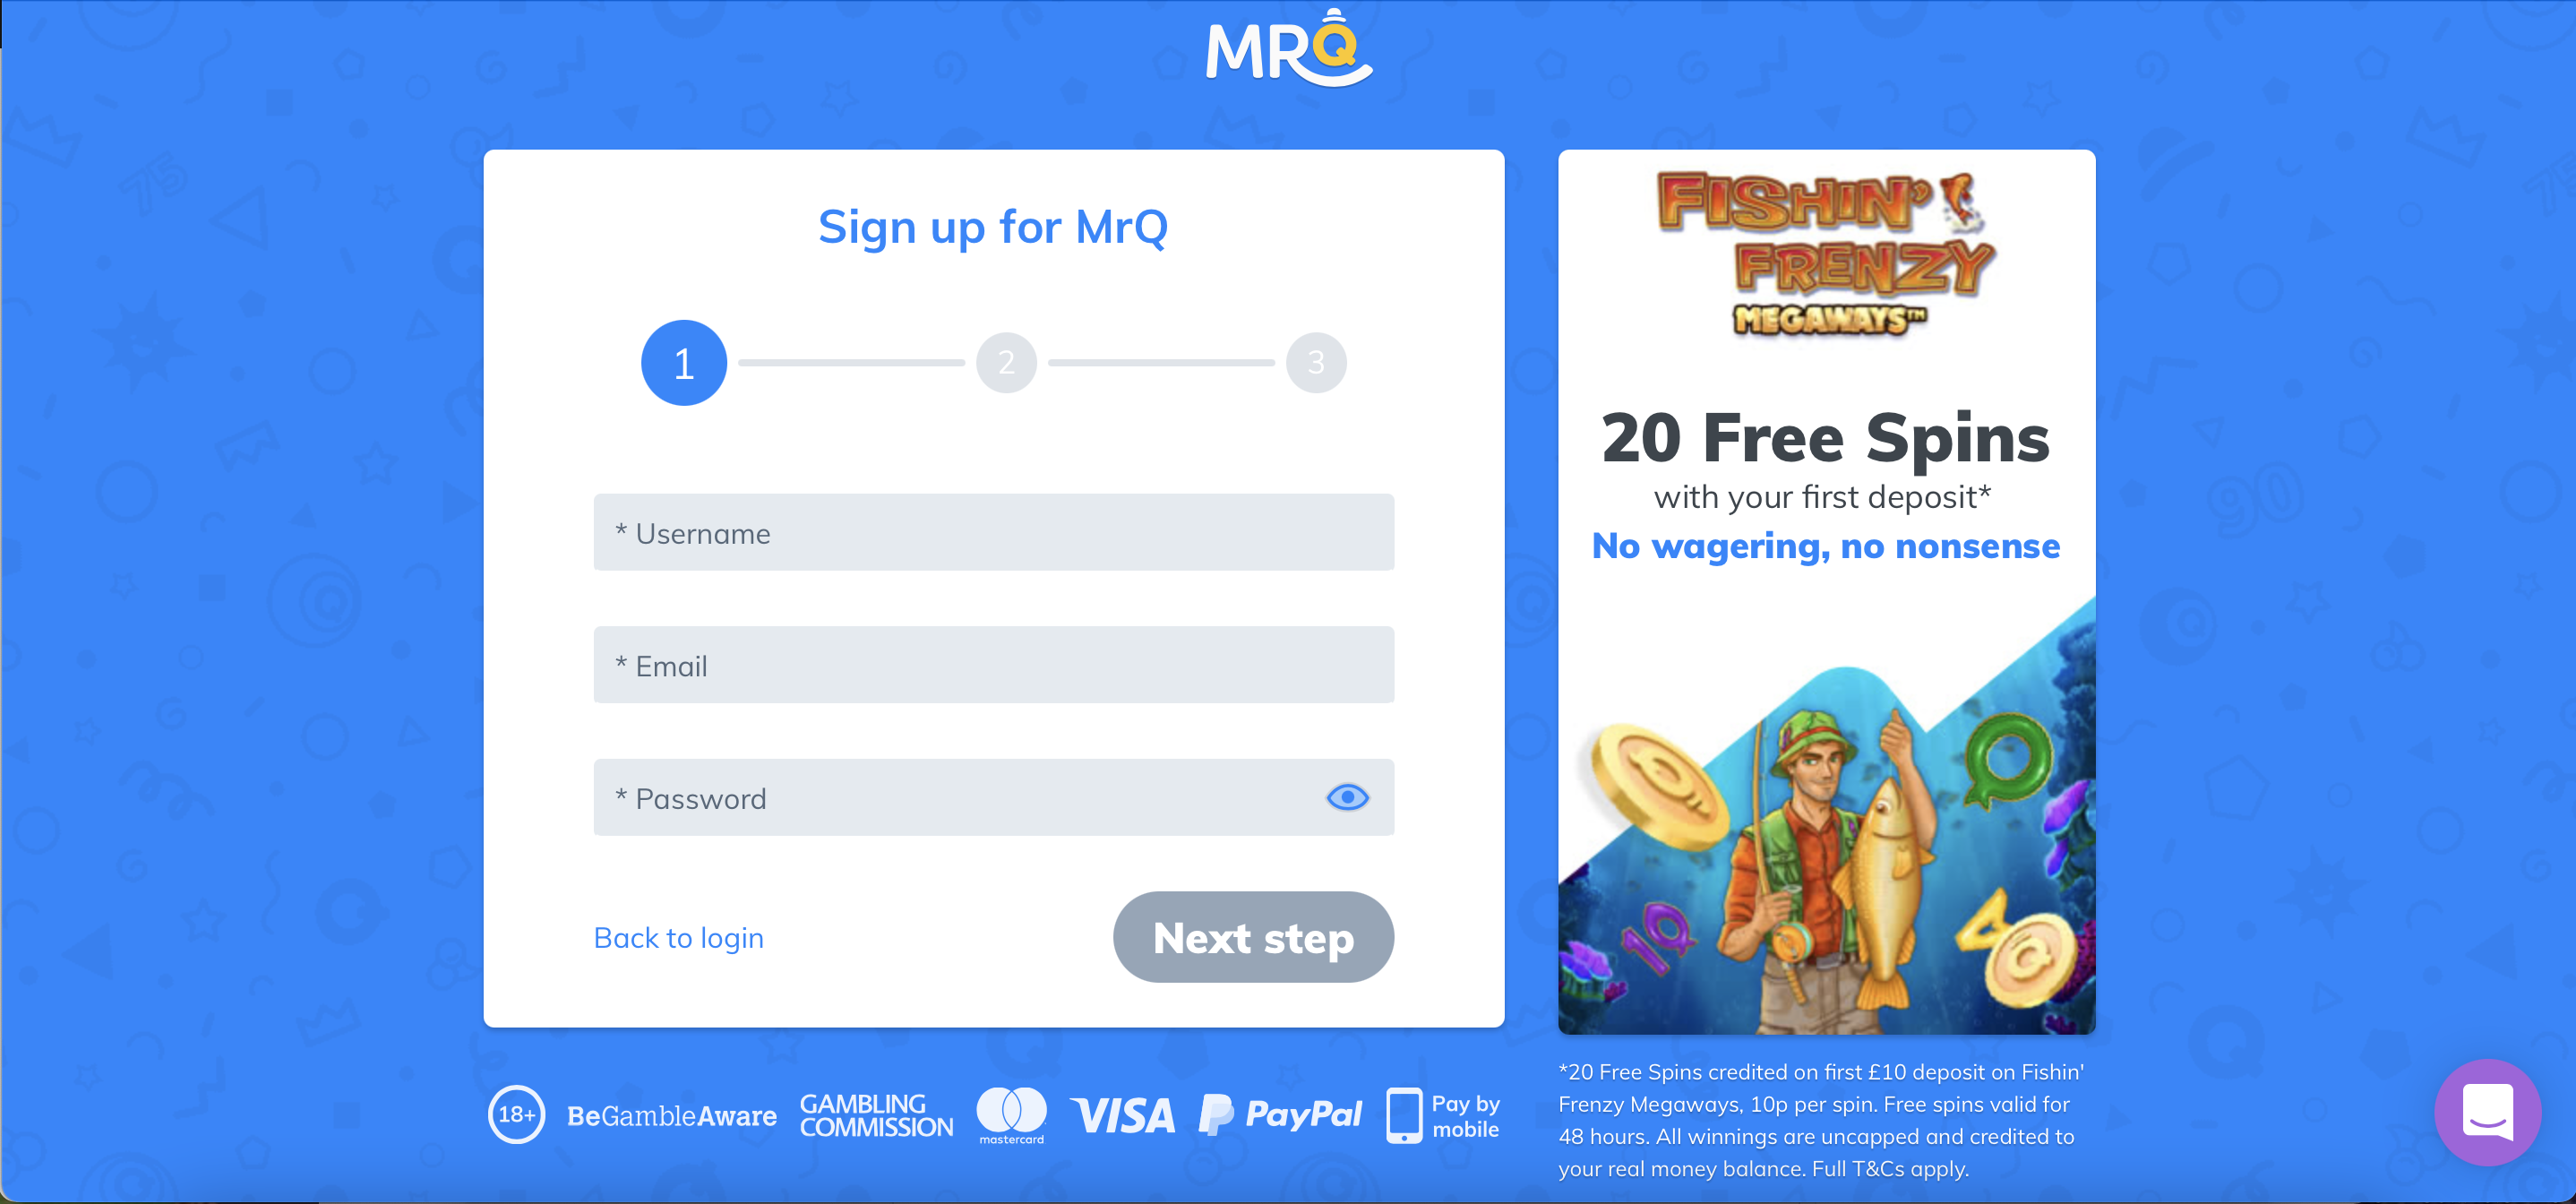 mrq casino login - What Can Your Learn From Your Critics